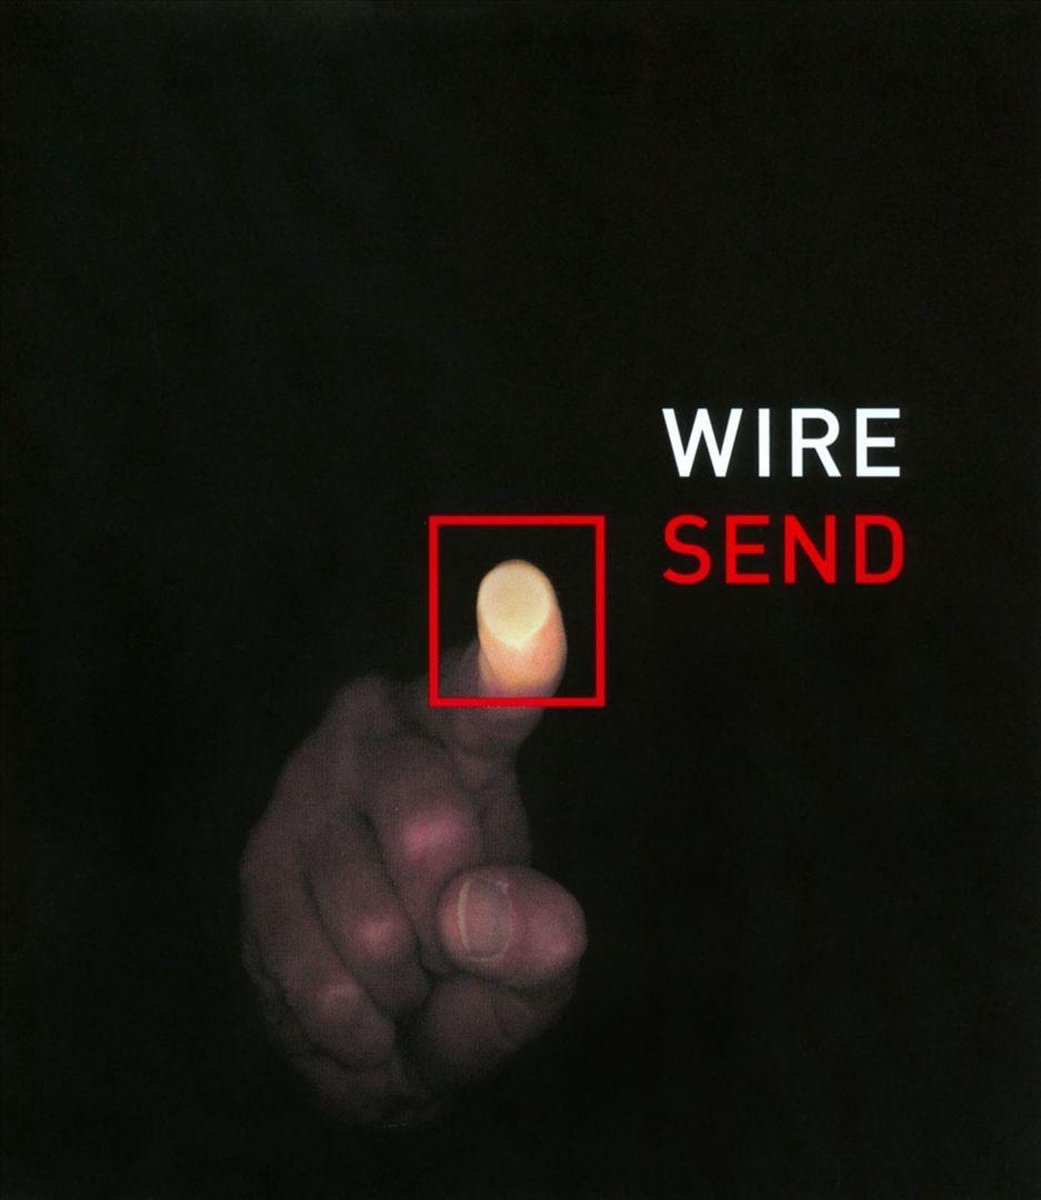 NEWS On this day, 17 ago, Wire returned after a hiatus of a decade with their 10th studio album, Send!